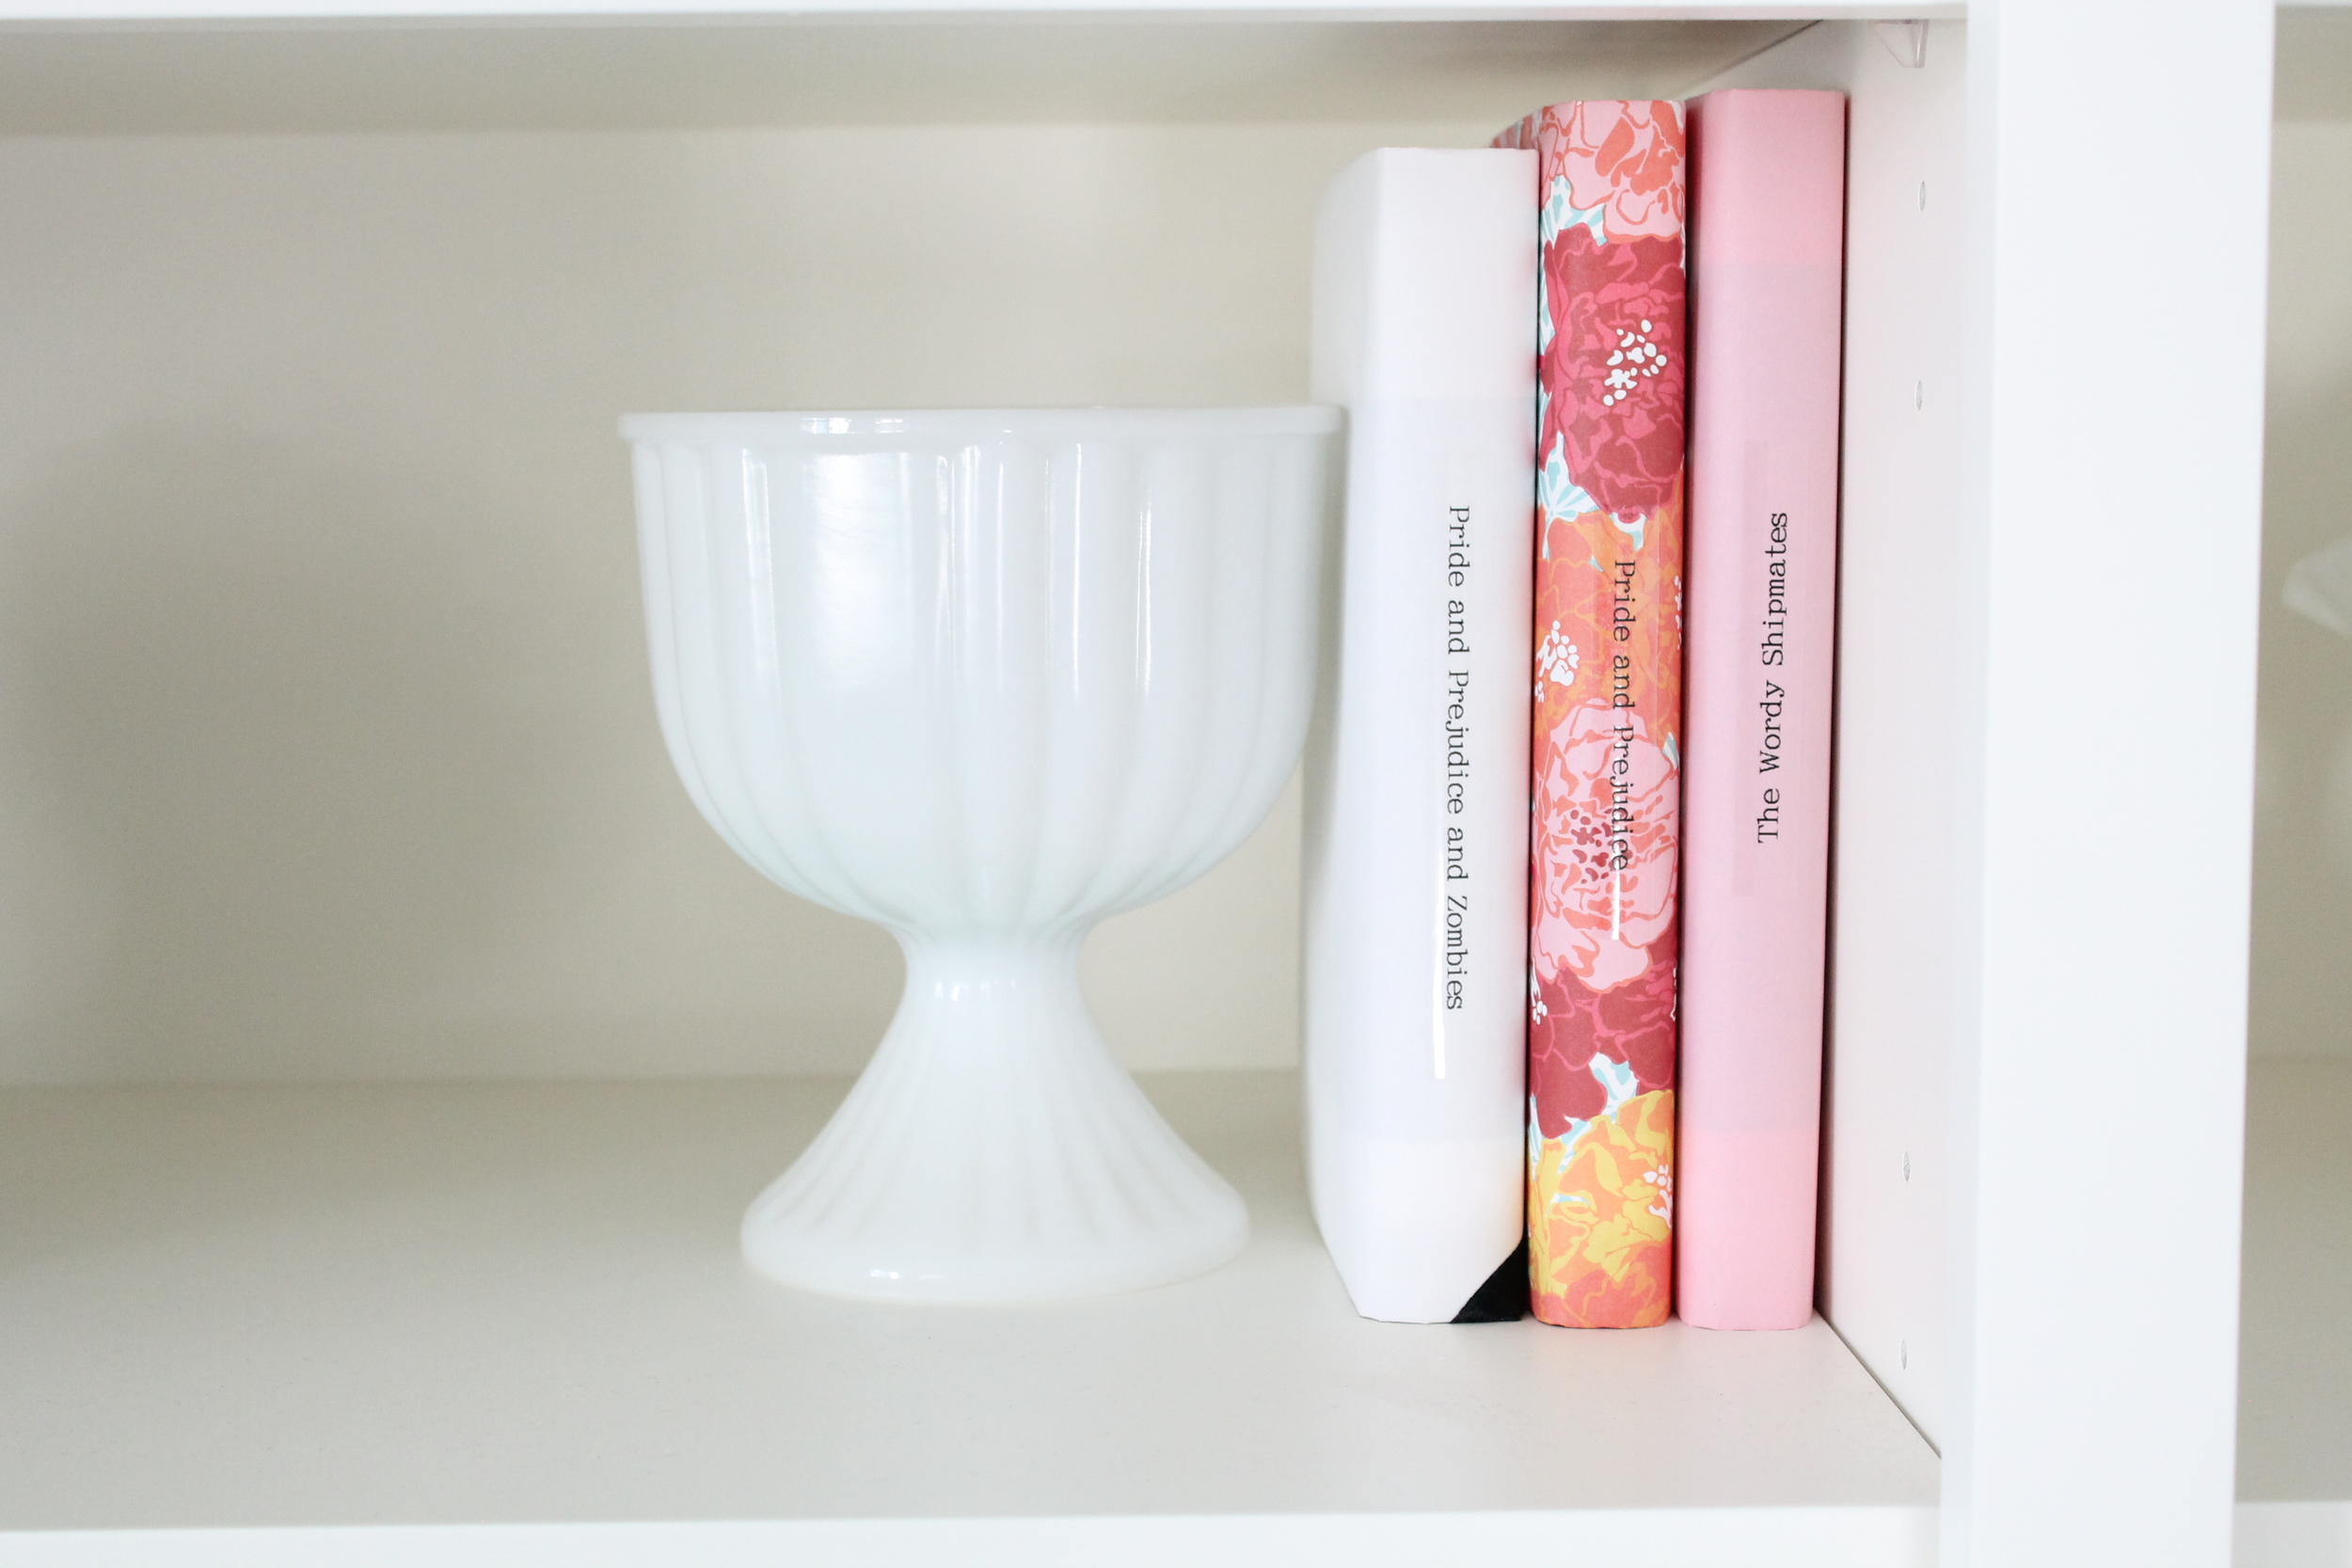 Built in bookshelf decorating ideas. Style a bookshelf with a cohesive color pallet by covering books with pretty paper. Add some glass objects and small frames to round out the design.